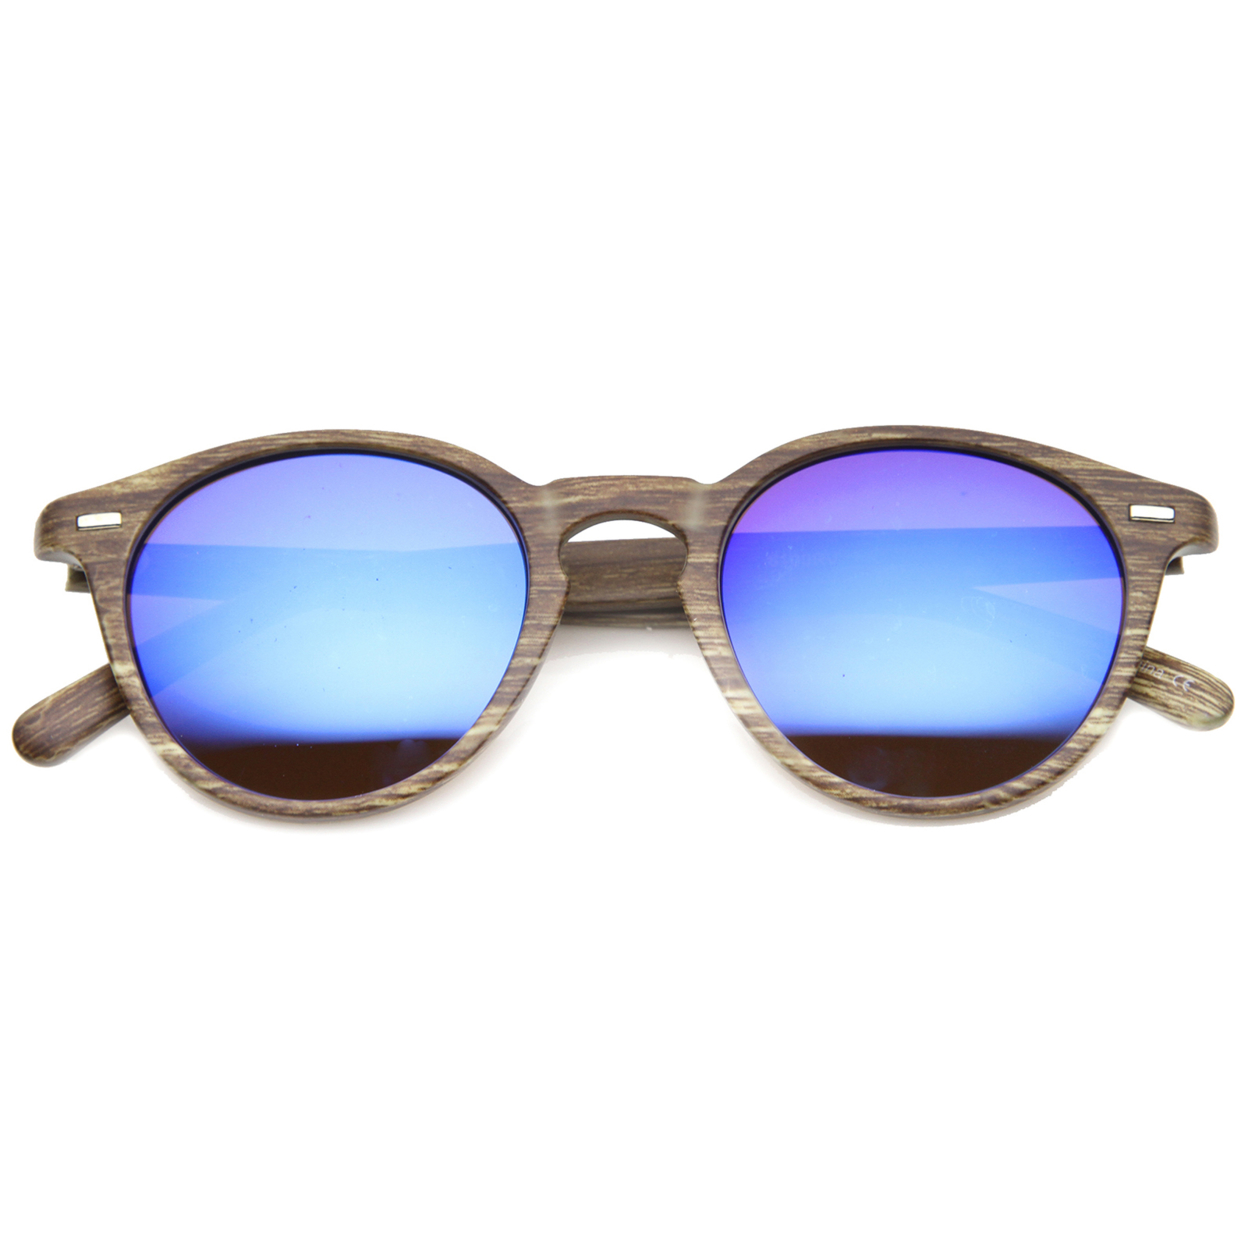 Mens Horn Rimmed Sunglasses With UV400 Protected Mirrored Lens 9812 - Black-Blue-Wood / Violet